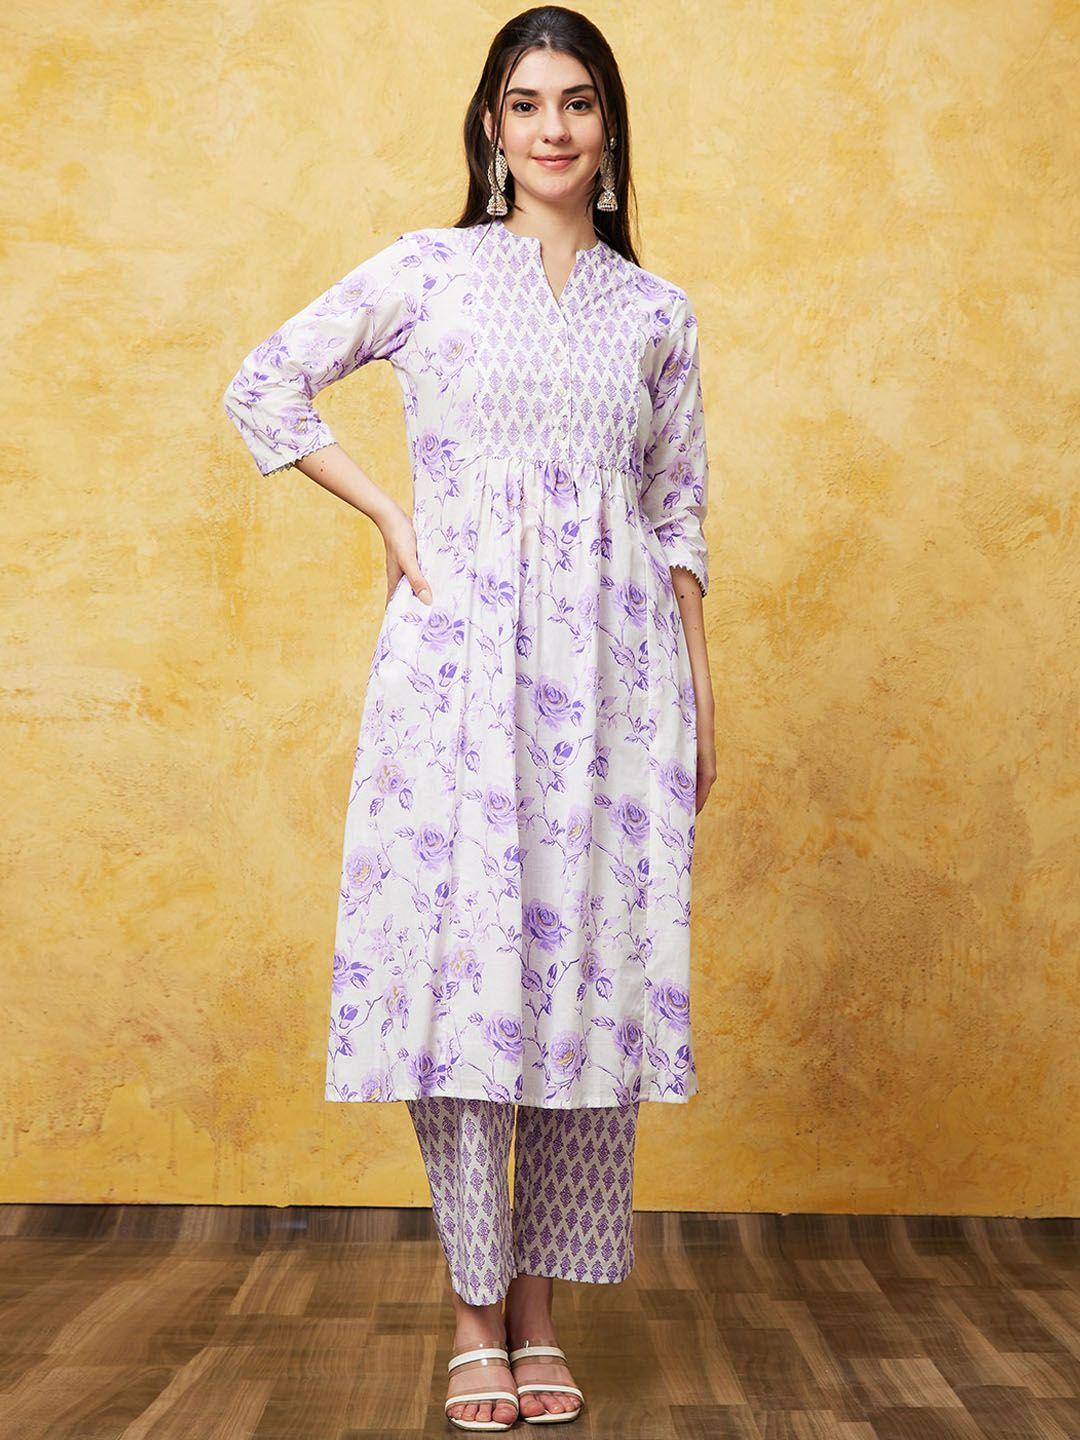 globus-off-white-floral-printed-band-collar-pure-cotton-kurta-with-trousers